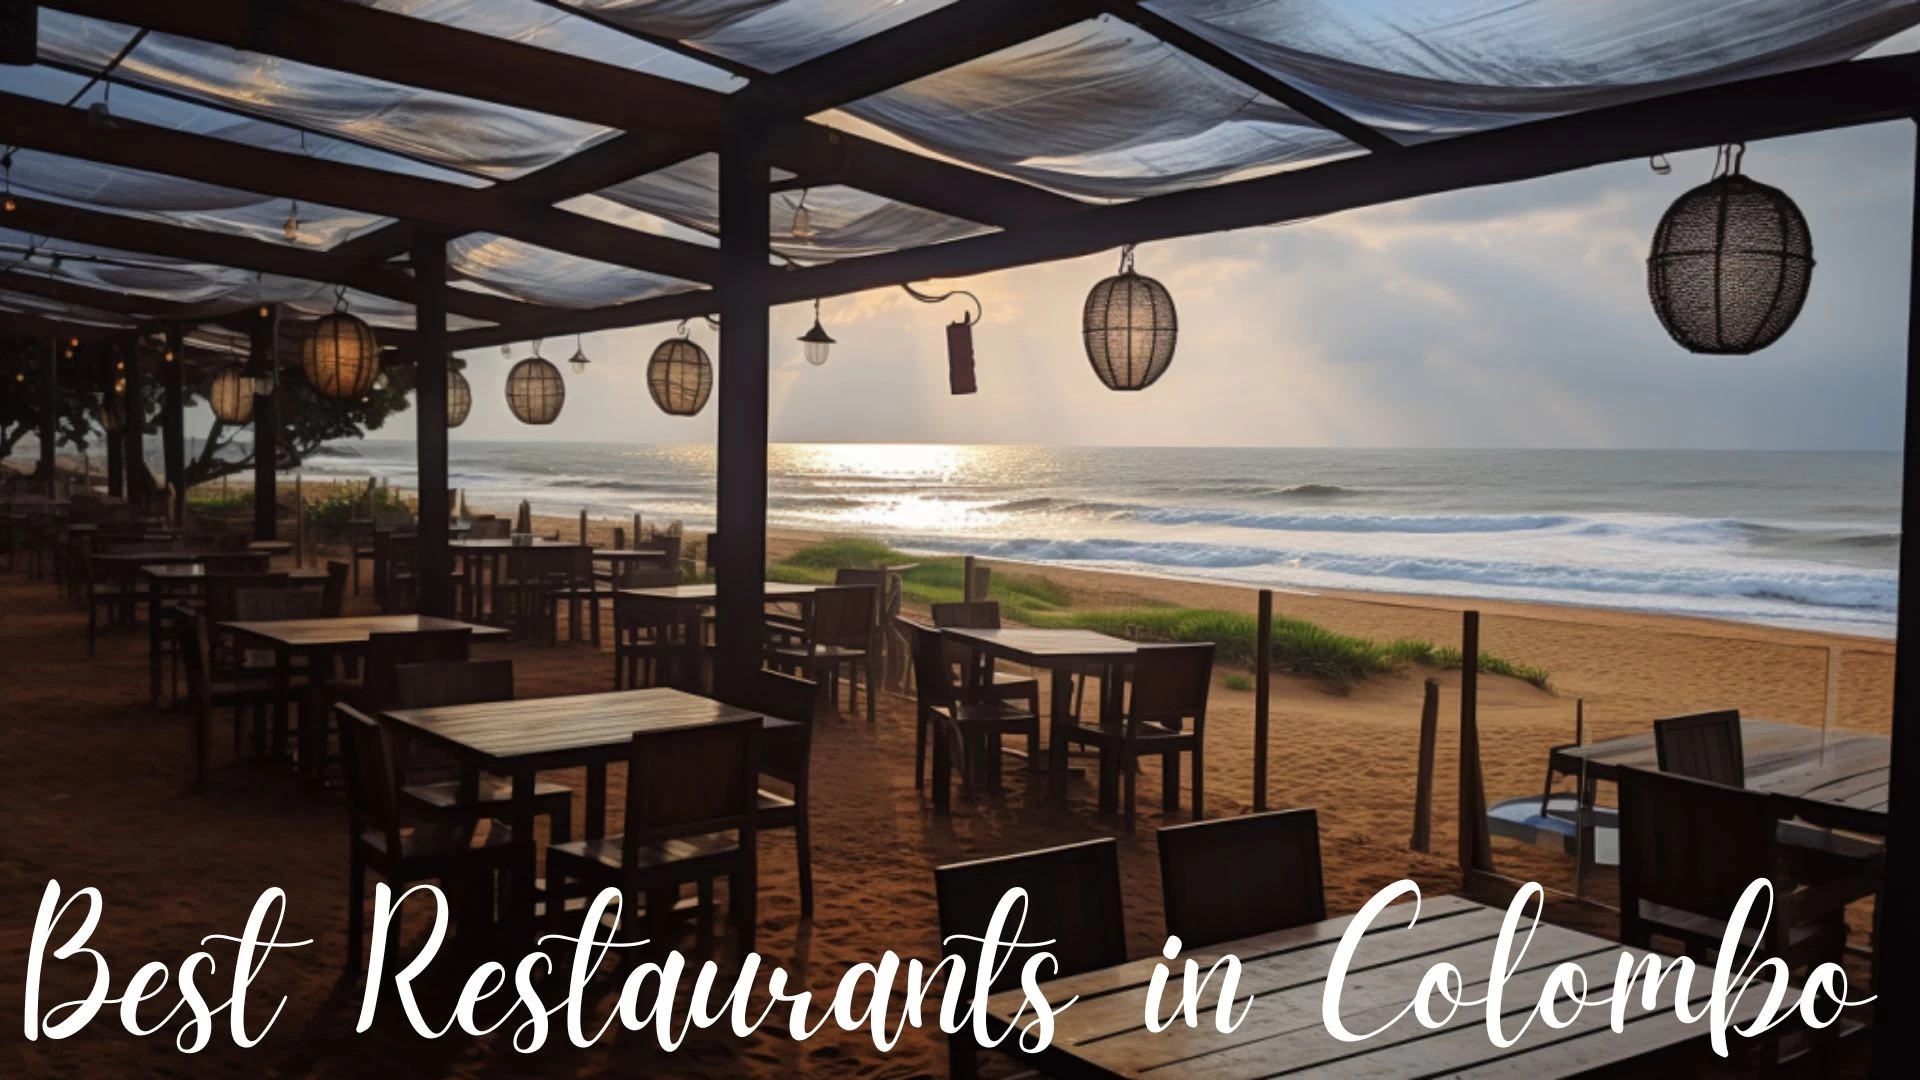 Best Restaurants in Colombo - Top 10 Dining Excellence